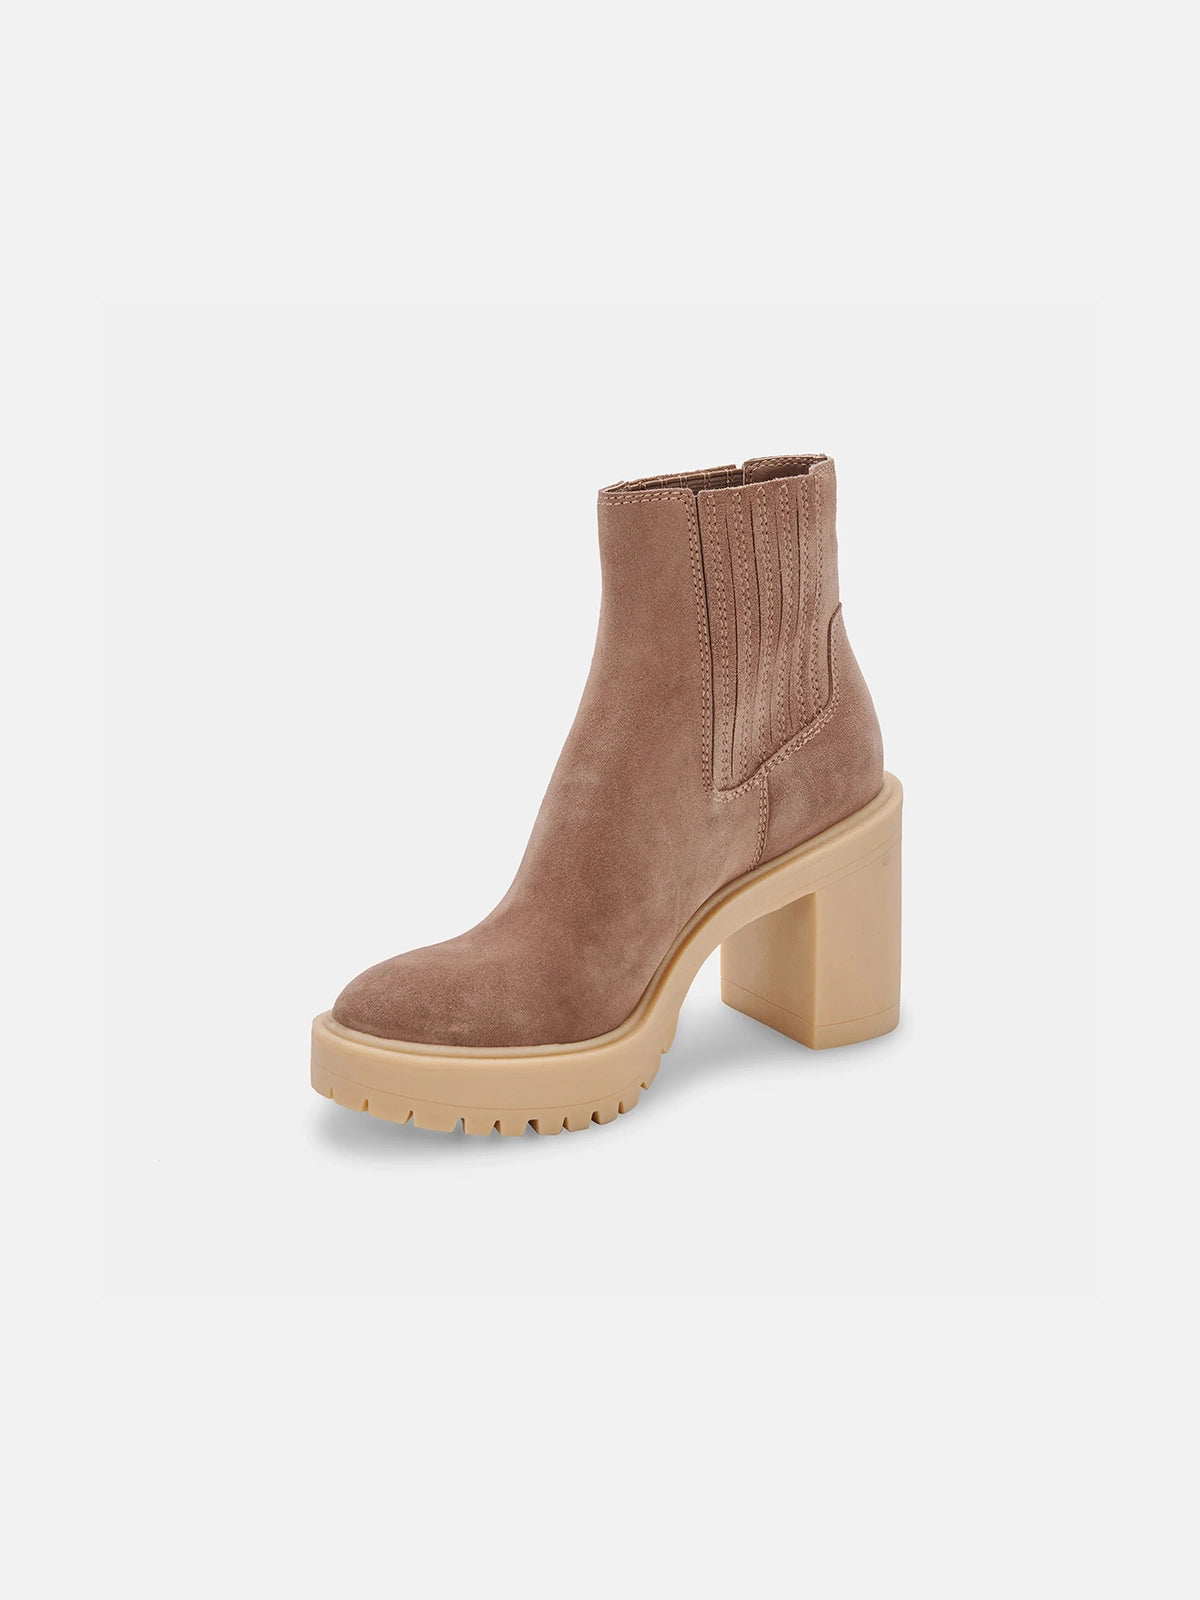 dolce vita caster h2o boots in mushroom suede